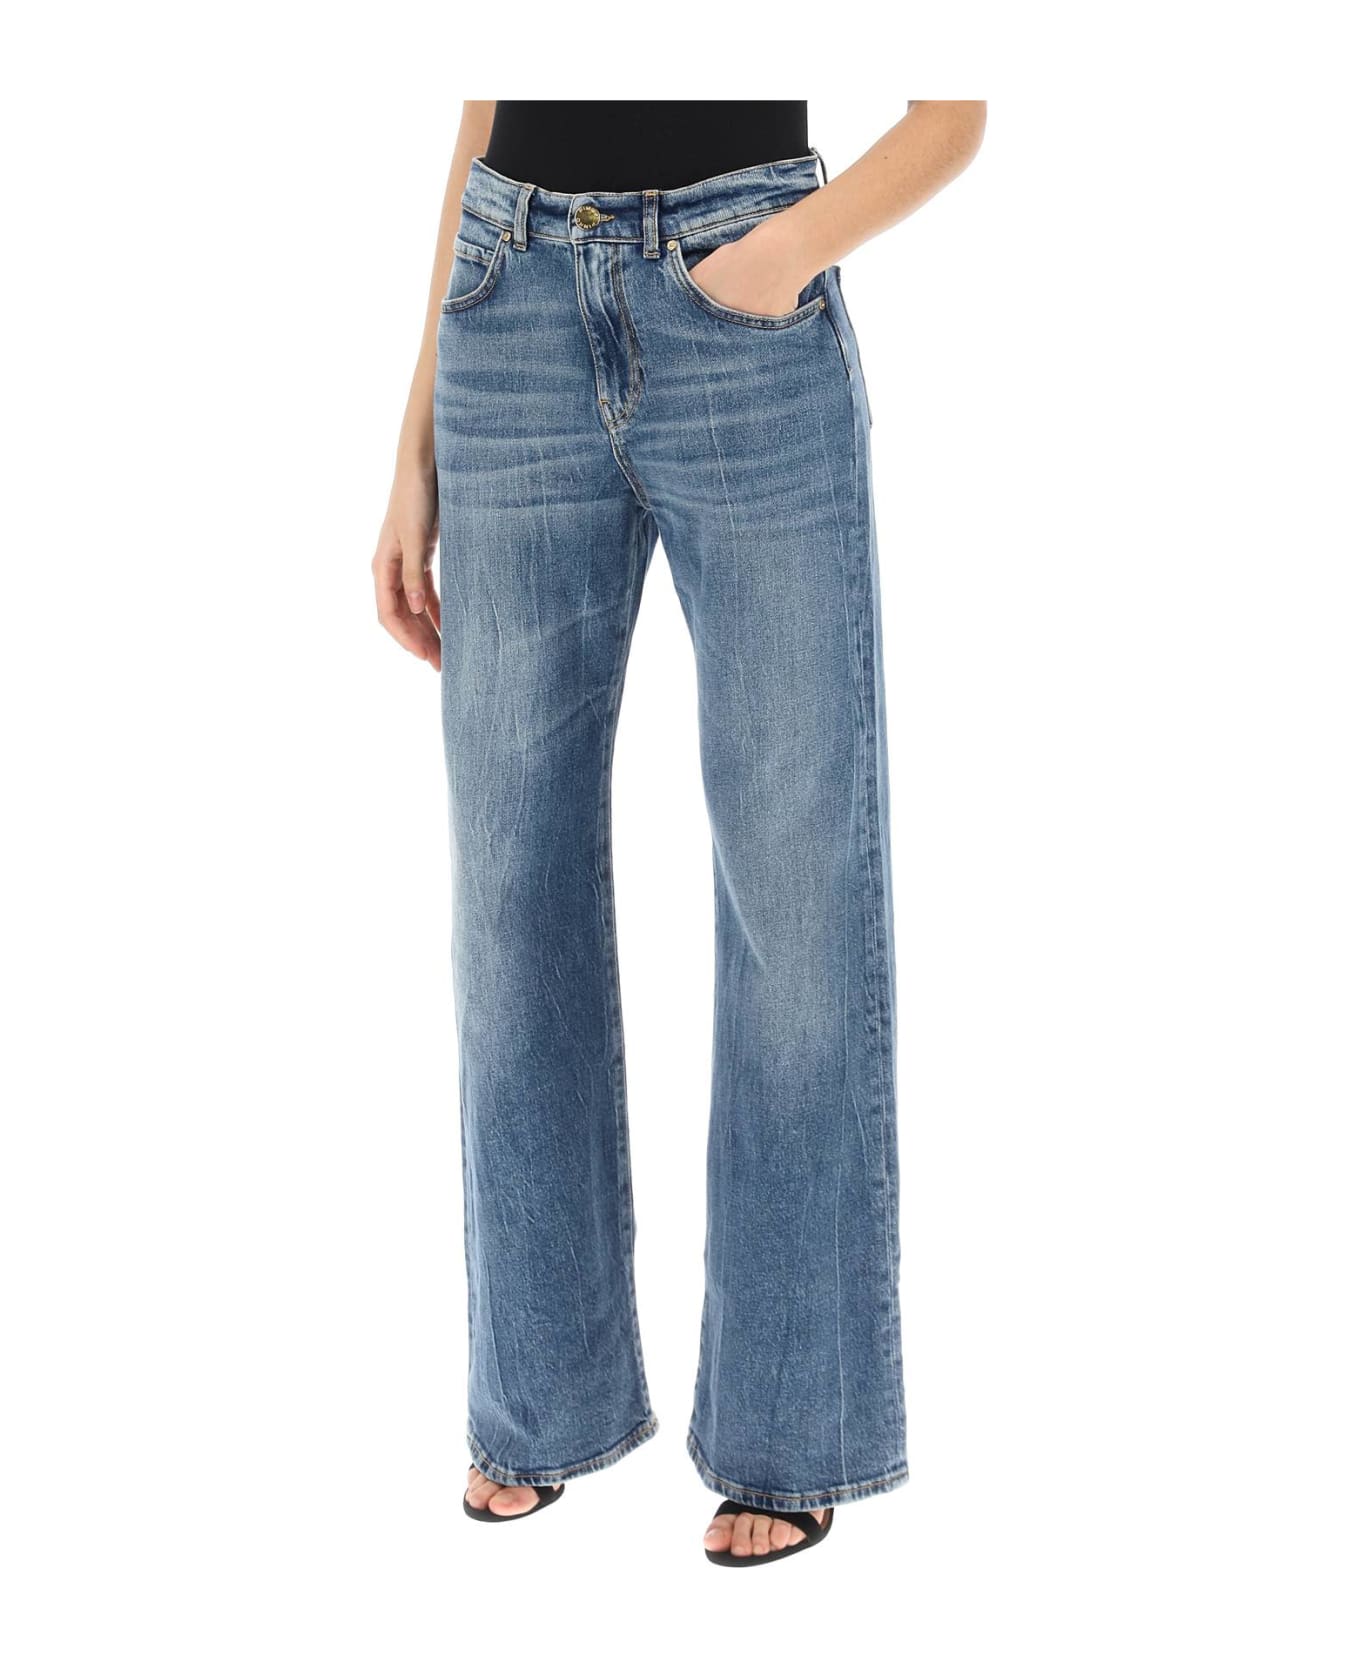 Pinko Wanda Loose Jeans With Wide Leg - VINTAGE SCURO (Blue)